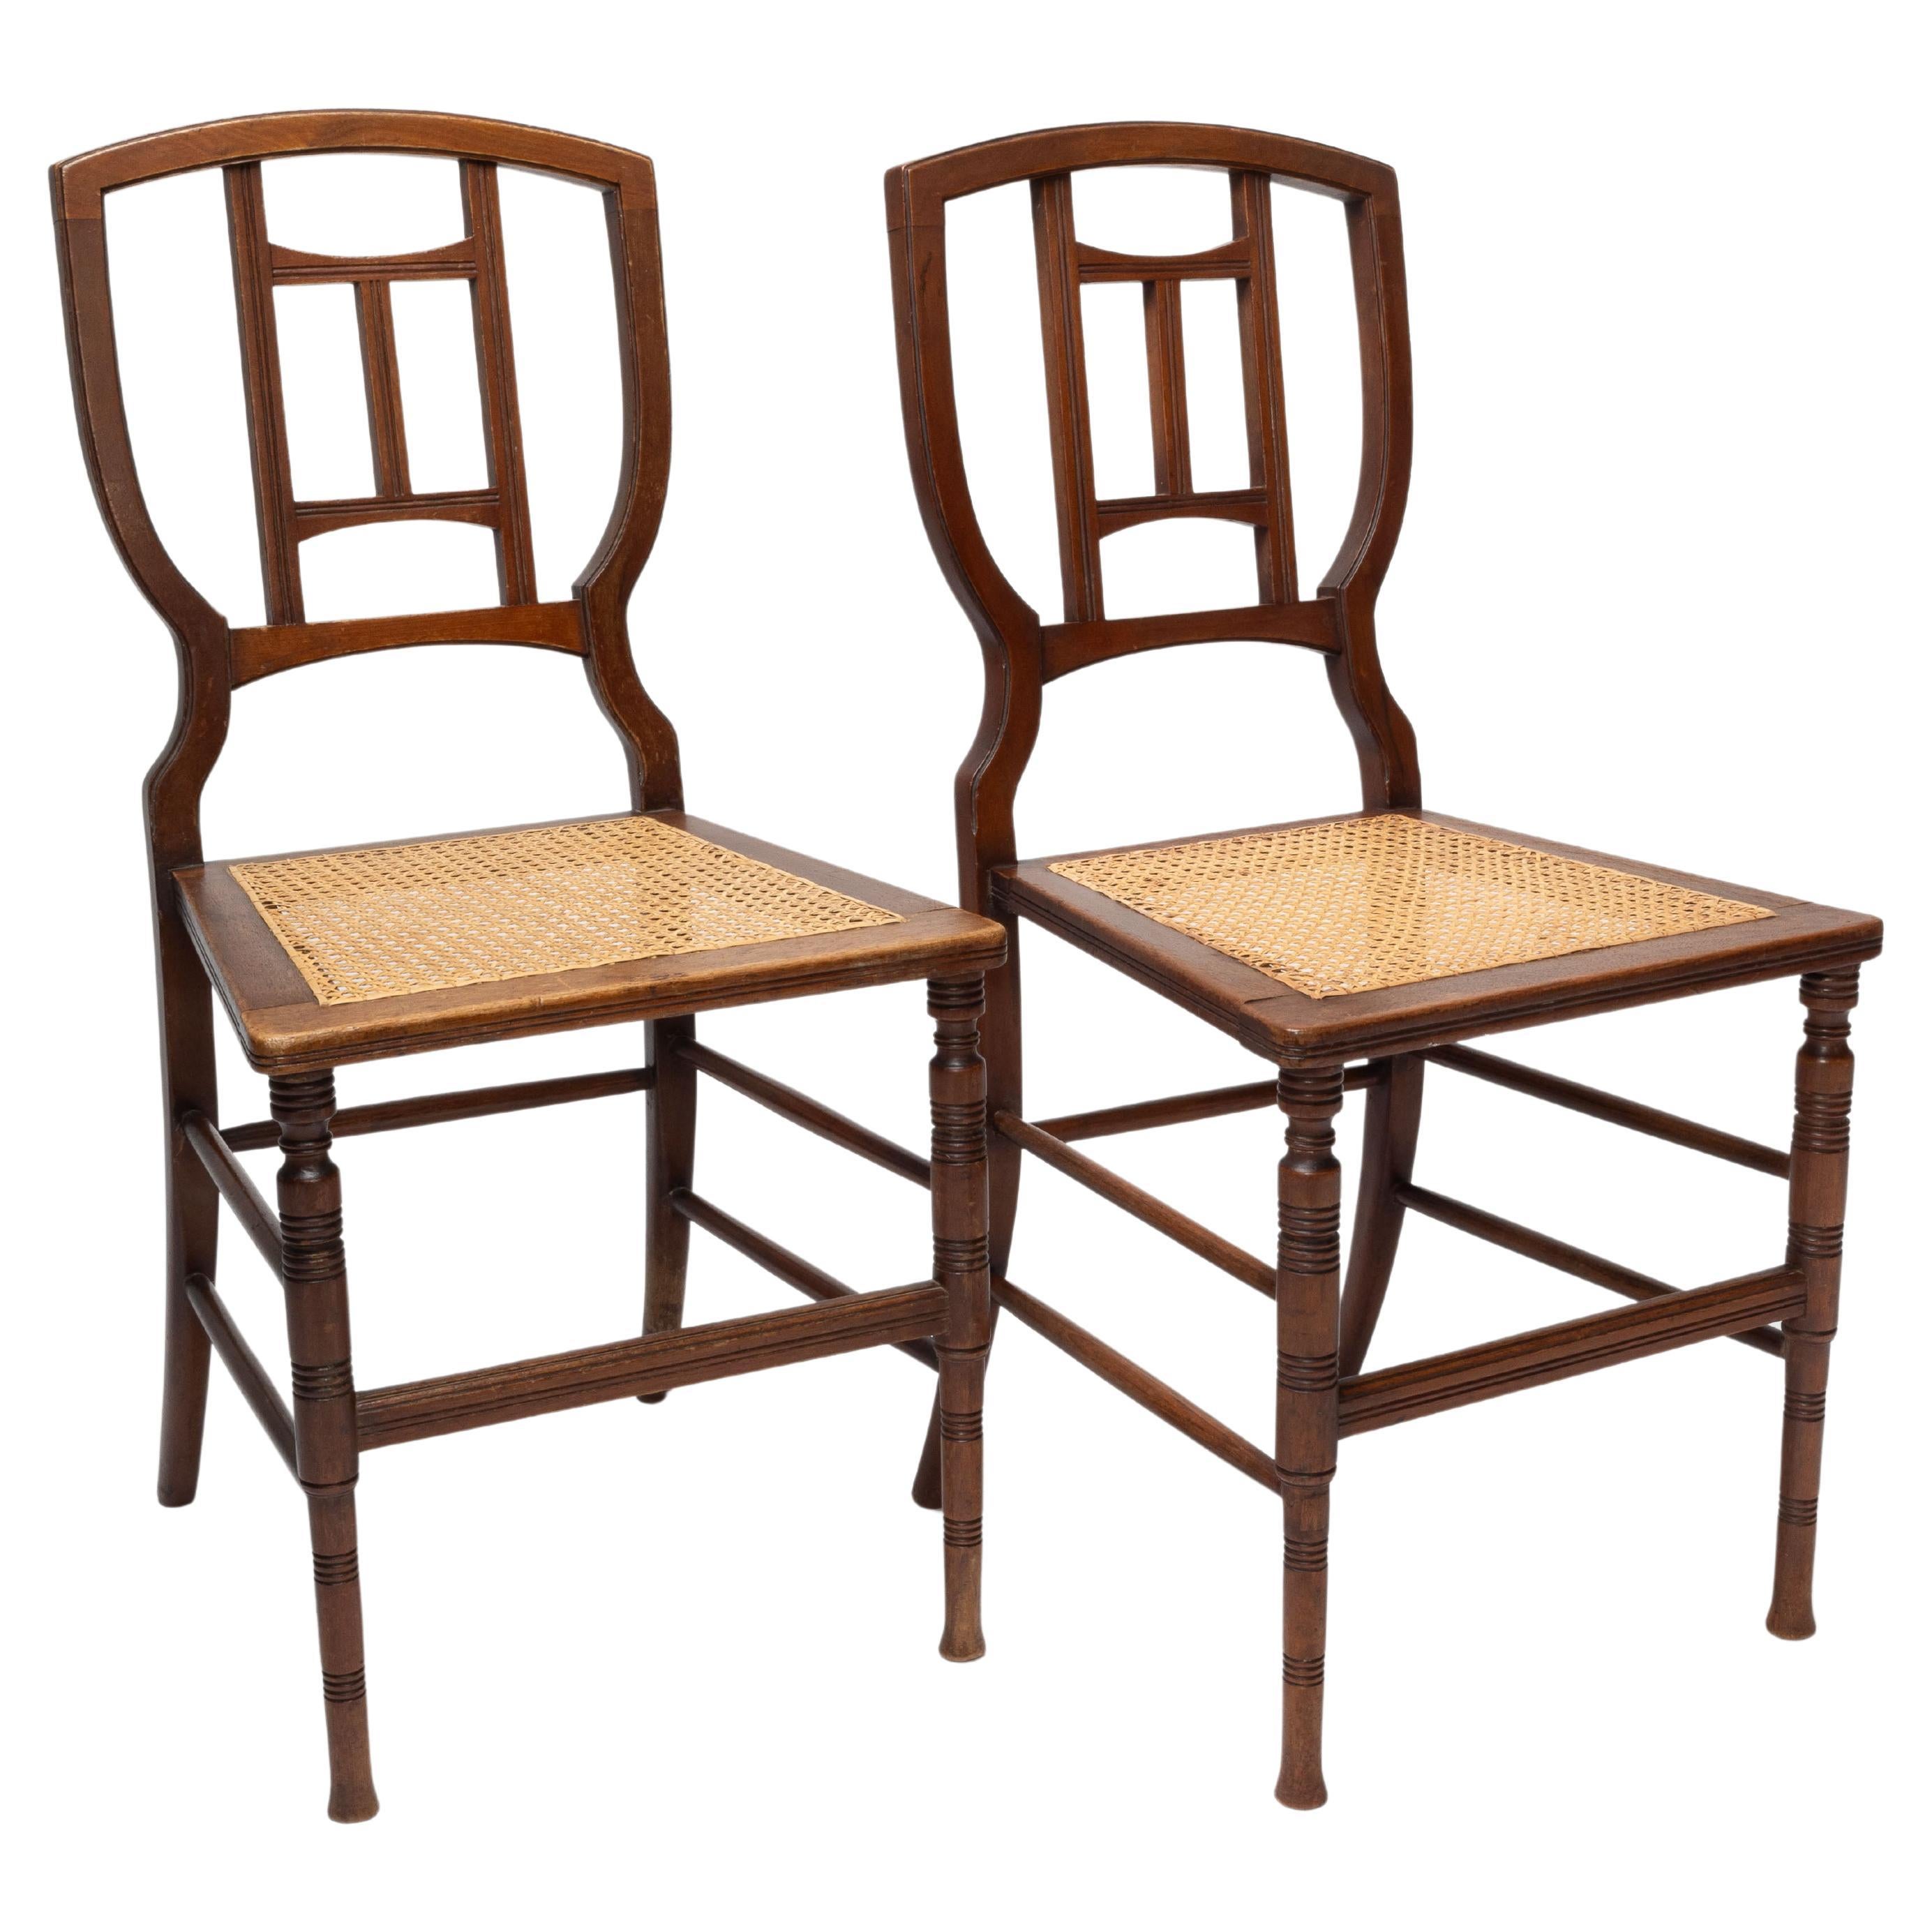 H W Batley attr. Jas Shoolbred Pair of Aesthetic Movement cane seat beech chairs For Sale